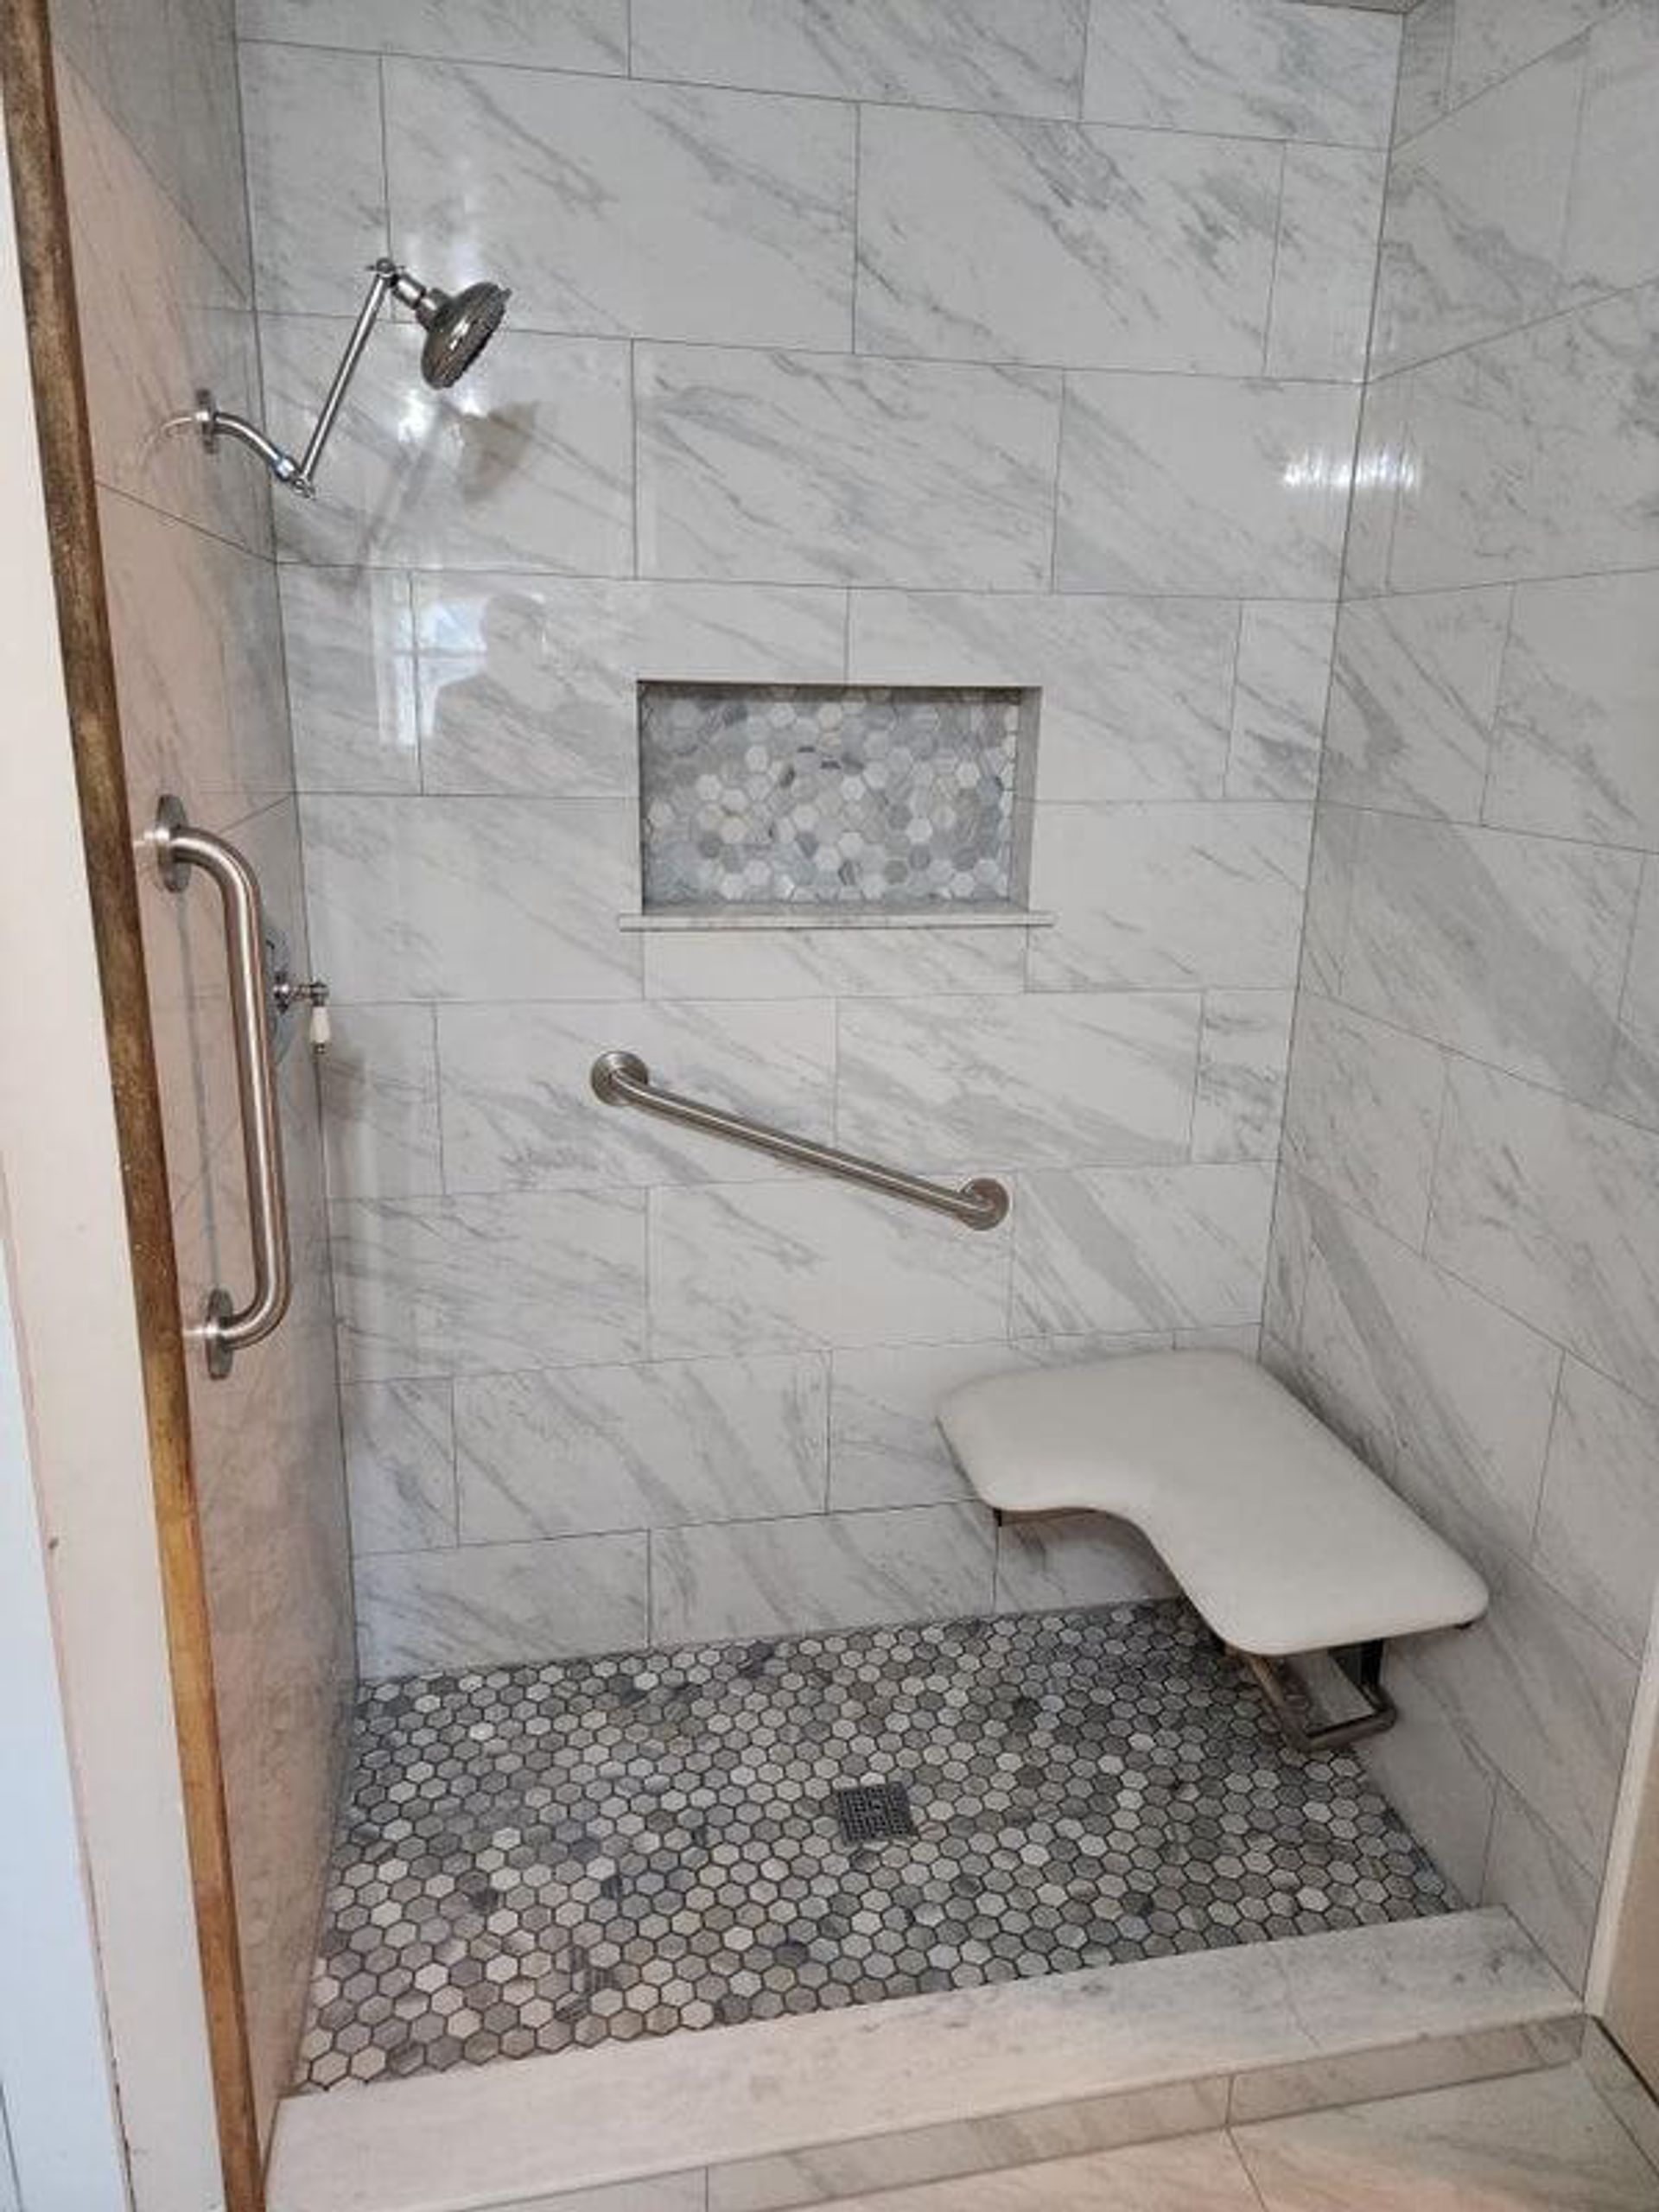 Accessible shower with grab bars and shower seat